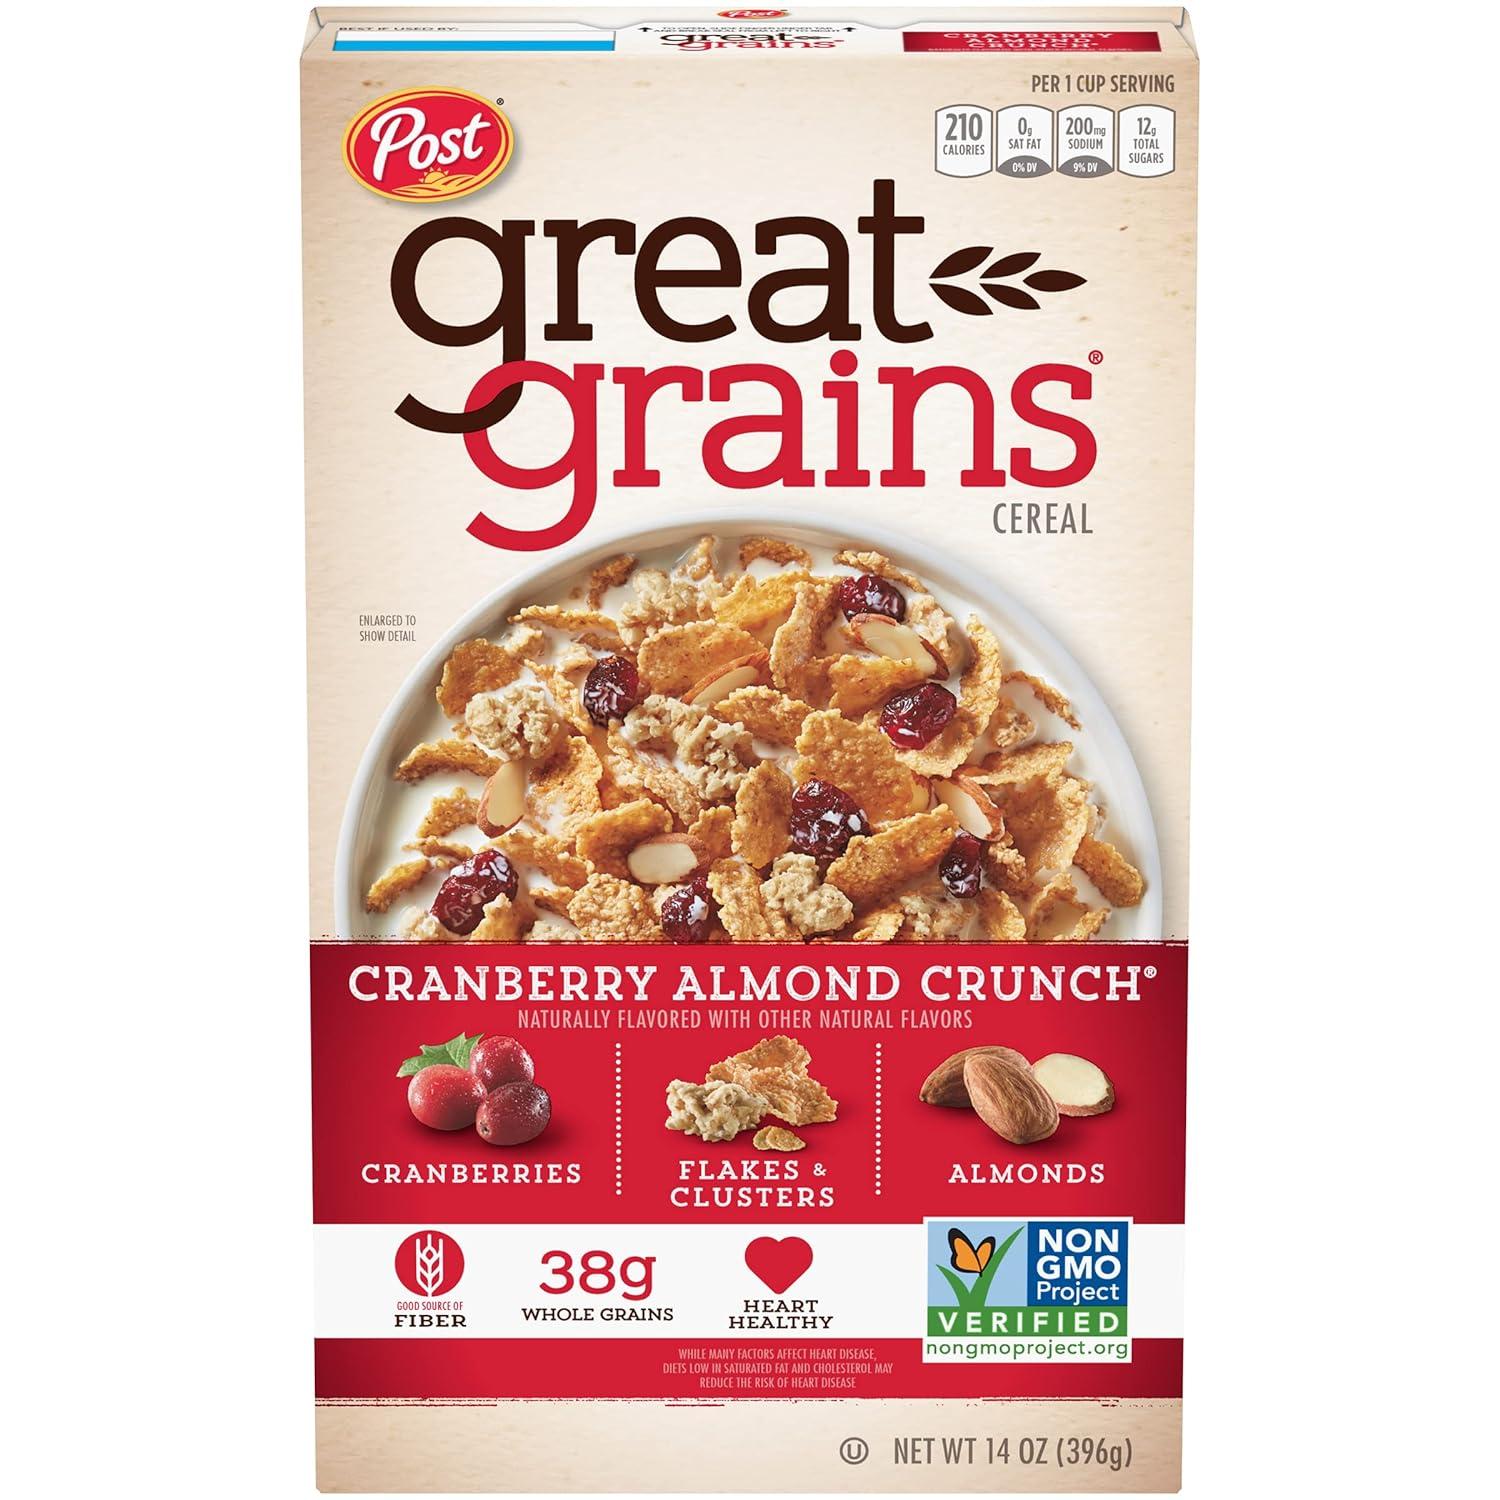 Great Grains Cranberry Almond Crunch Cereal for $3.04